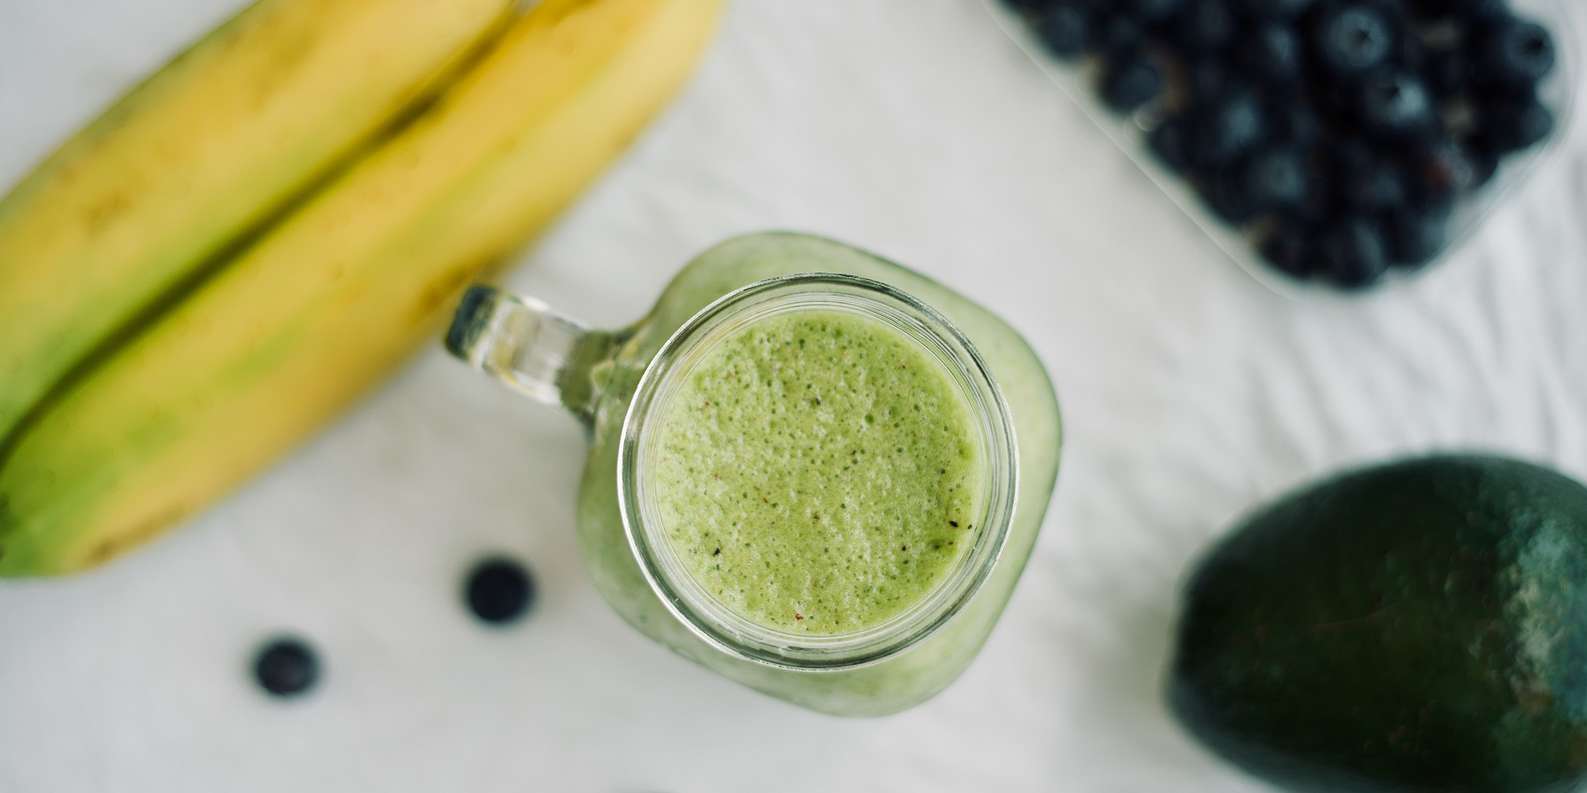 Mighty Brain Booster Smoothie